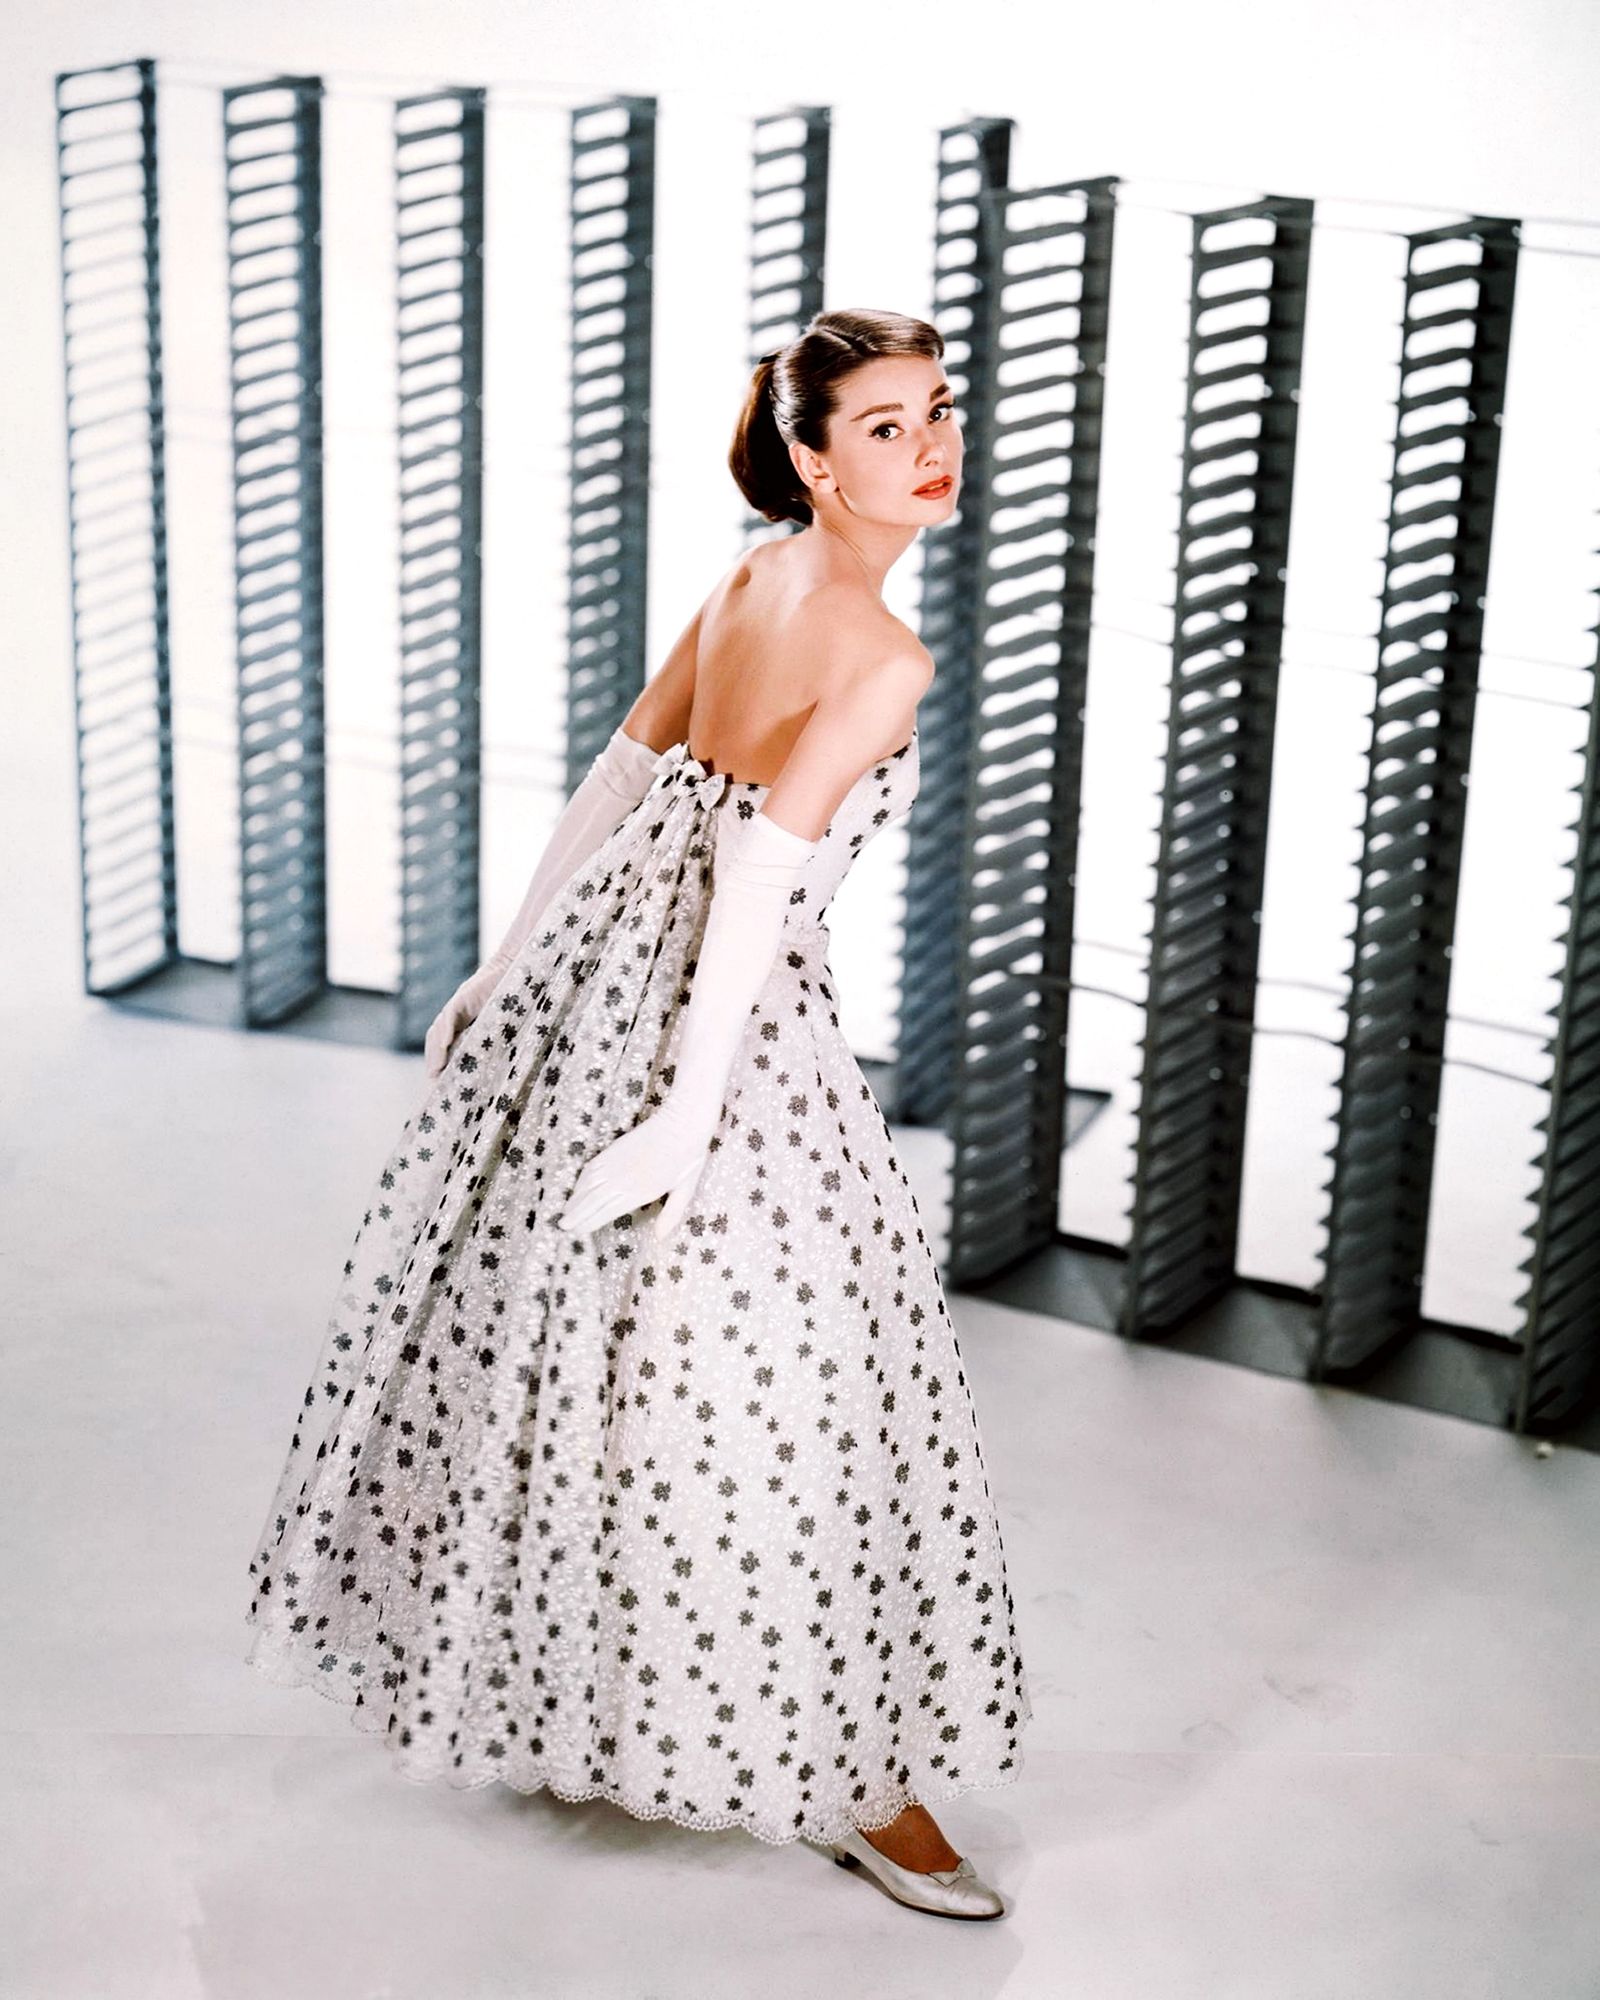 An elegant Outfit for everyday Life inspired by Audrey Hepburn